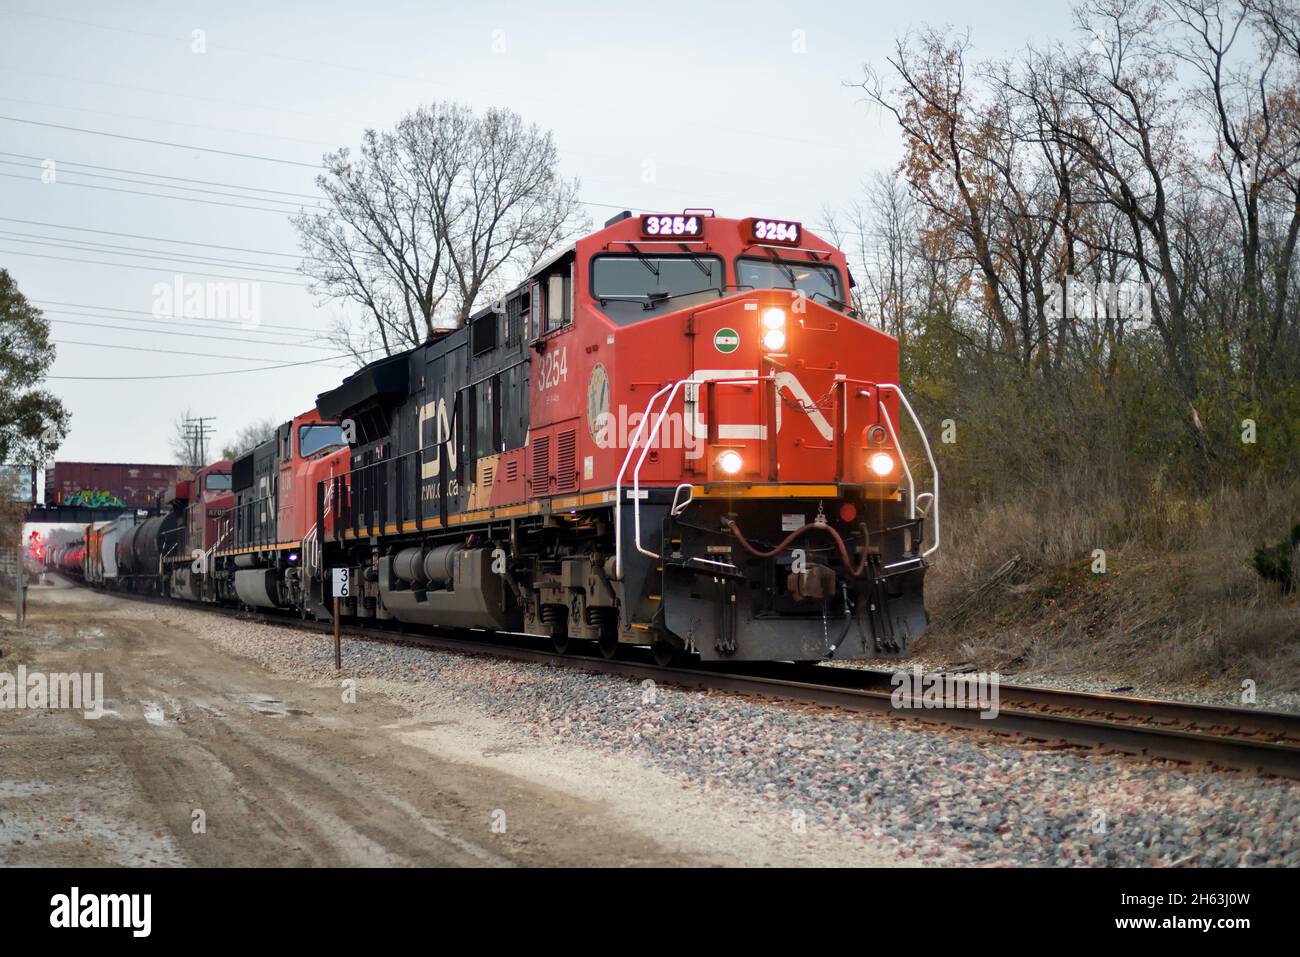 Wayne, Illinois, USA. A pair of Canadian National Railway freight trains meet on separate tracks and operating subdivisions. Stock Photo